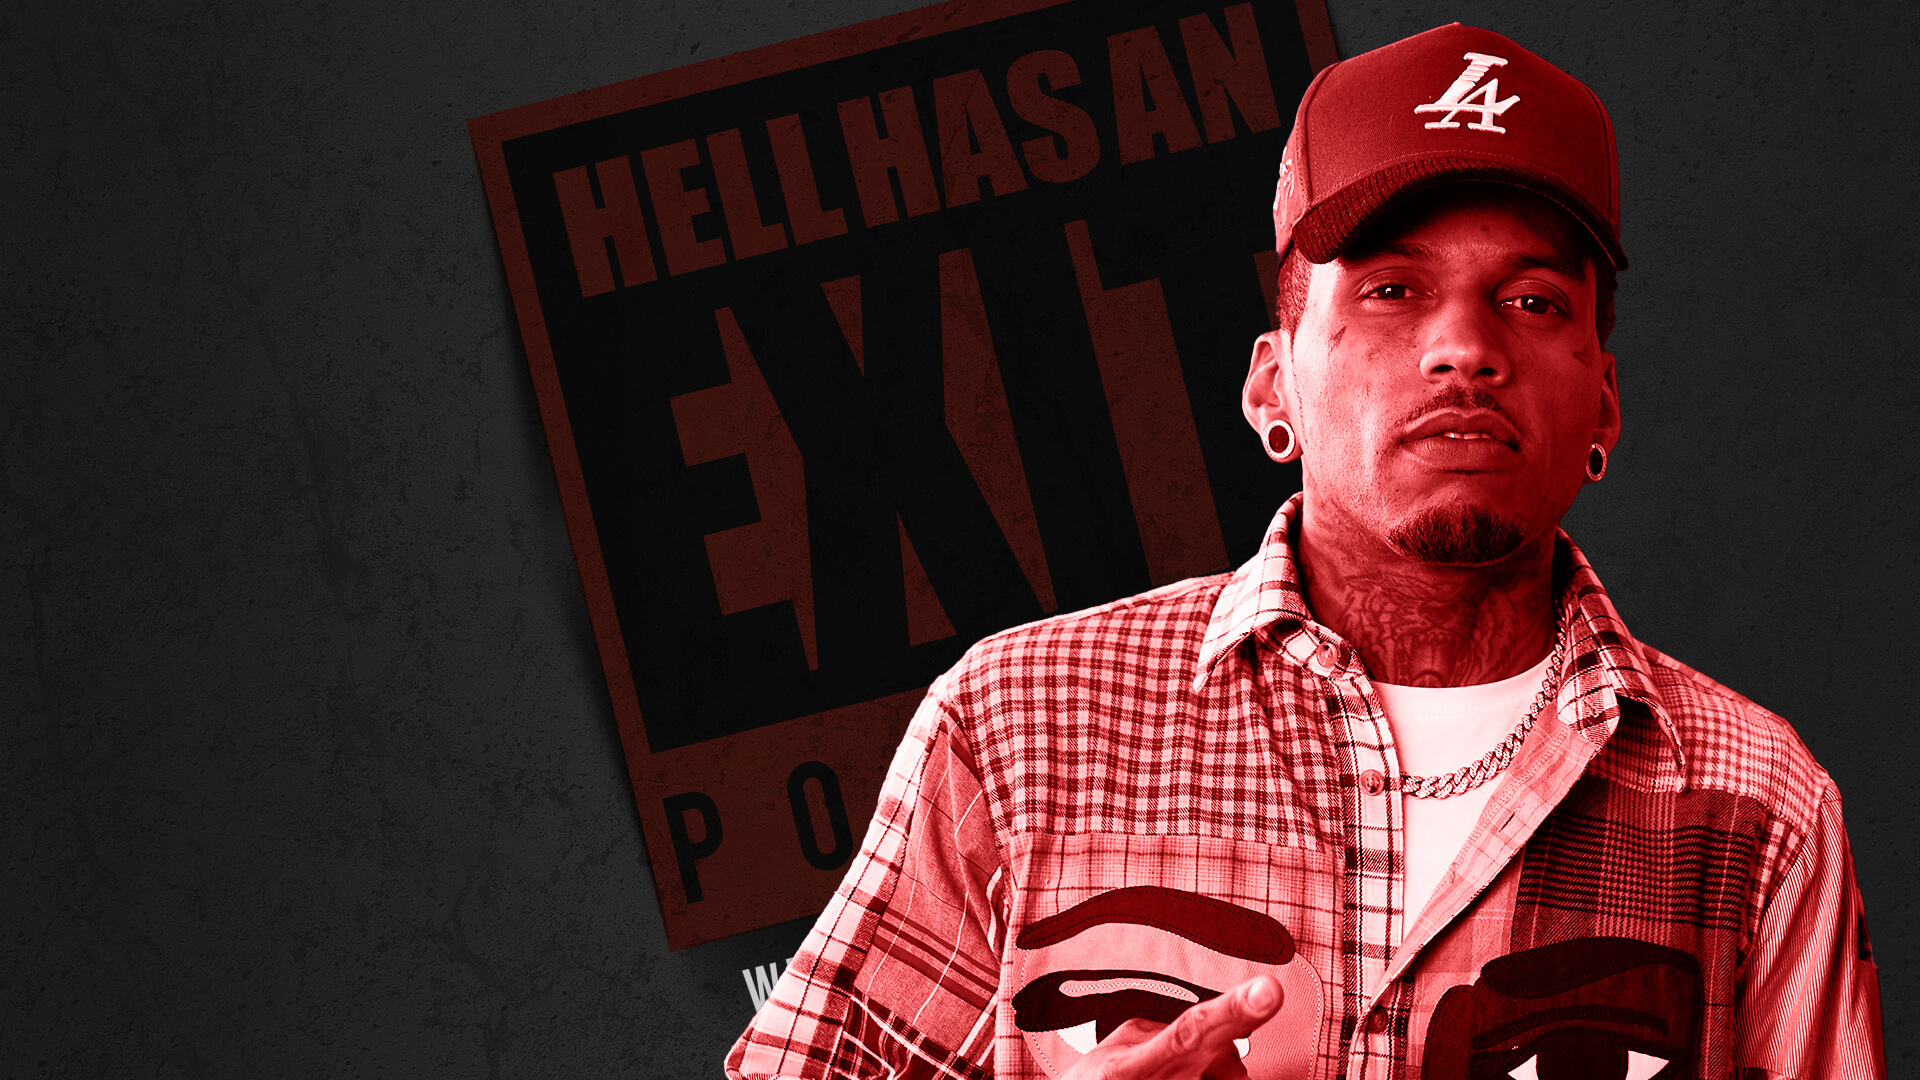 Episode #133: Kid Ink's Journey to Stardom and Friendship with Nipsey Hussle in 'Hell Has an Exit' Podcast